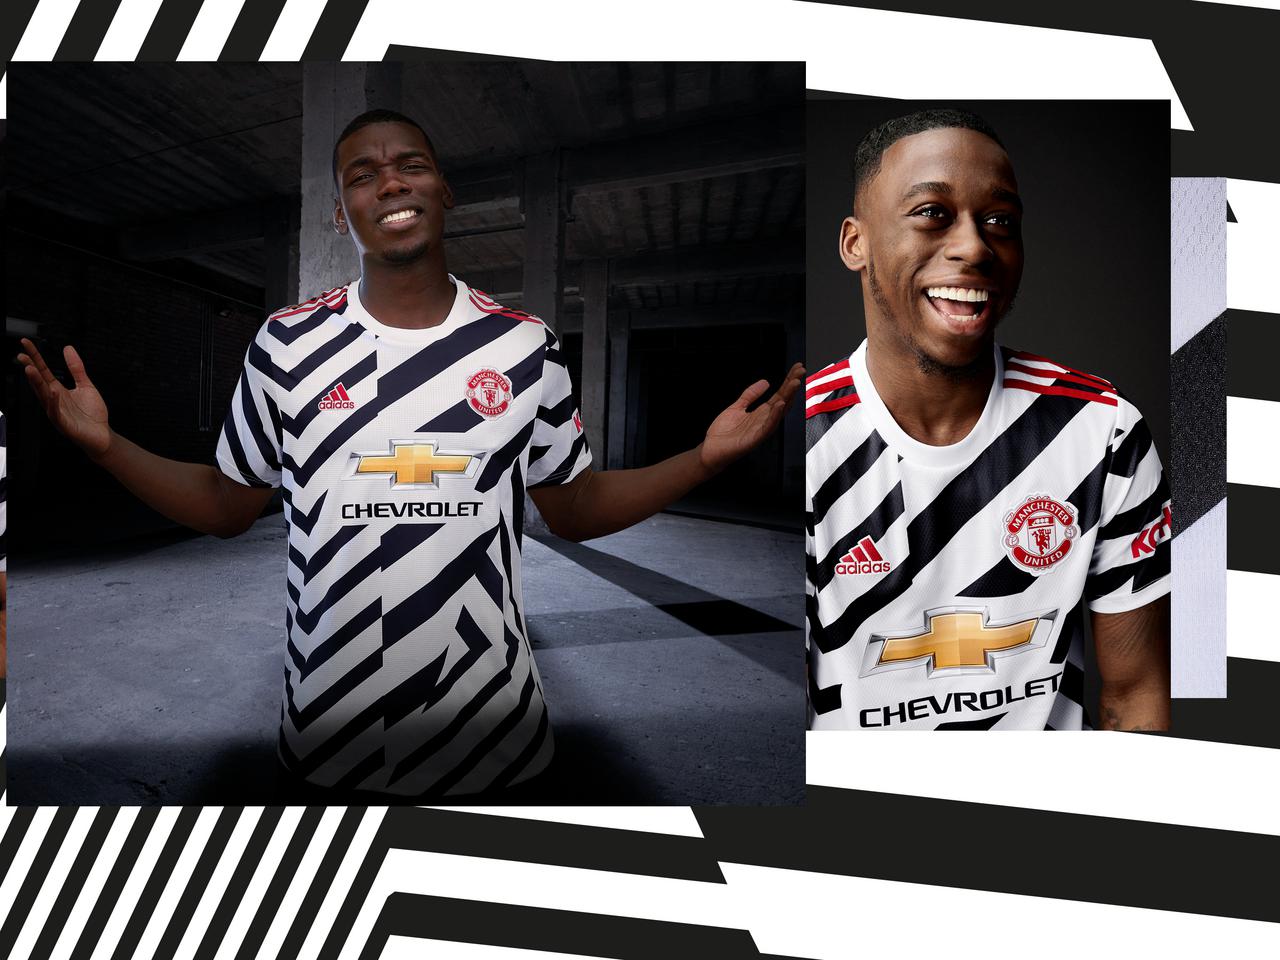 Man Utd Press Release For Adidas Third Kit In The 2020 21 Season Manchester United